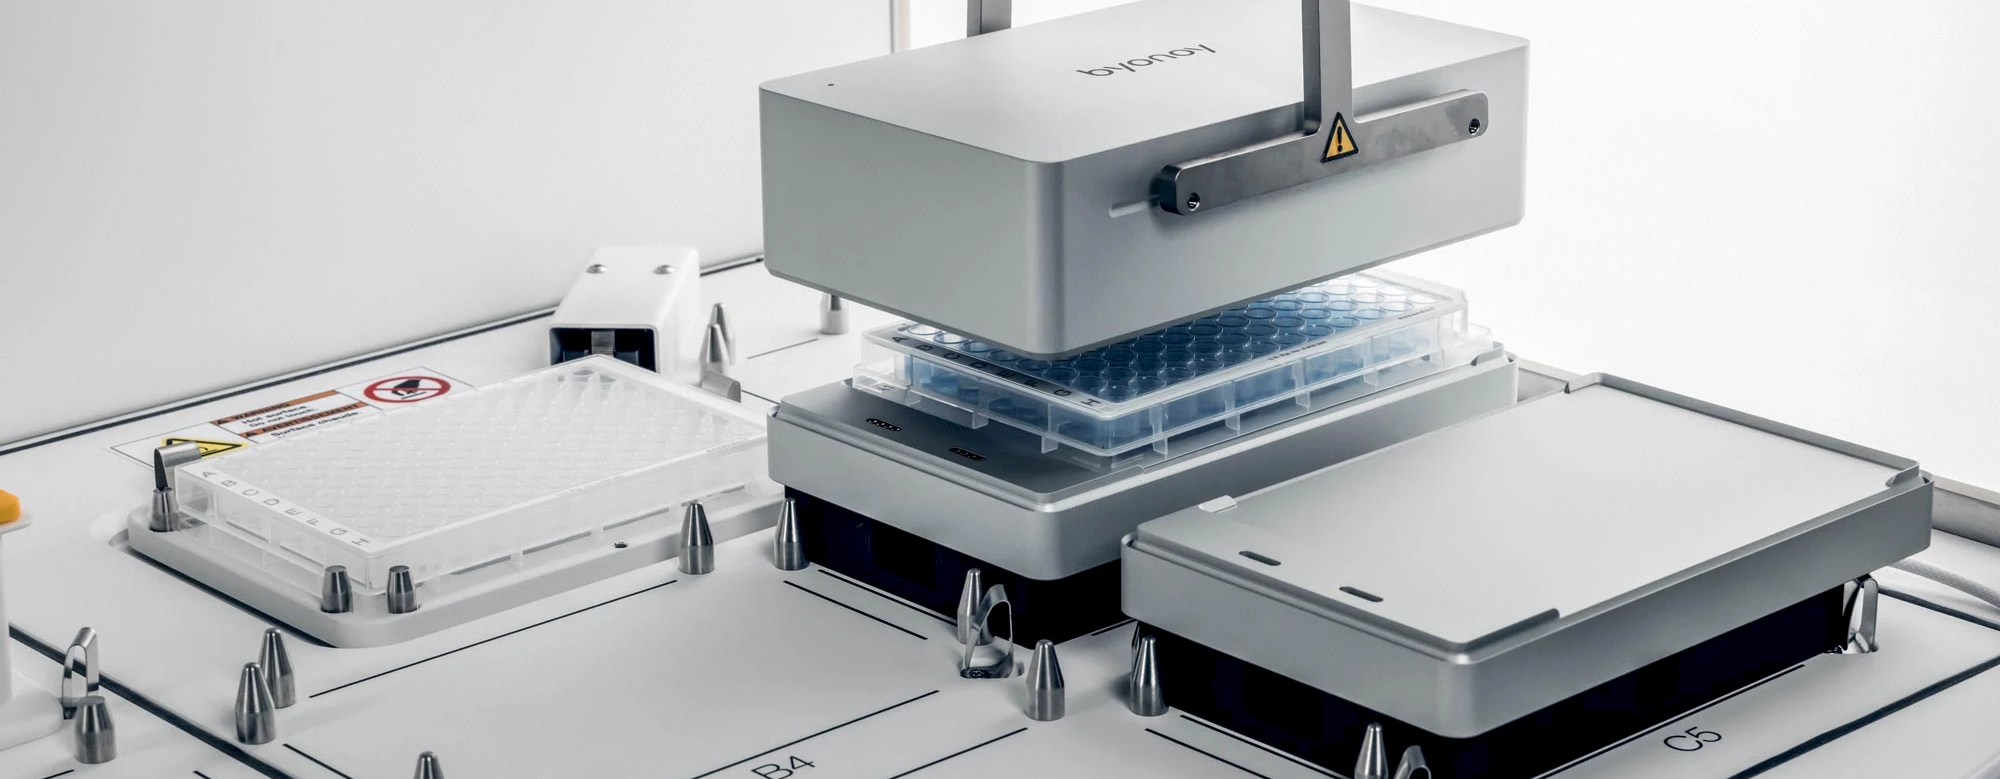 Optimizing protein assays: The integration advantage of Absorbance 96 Automate with Eppendorf epMotion® liquid handling system